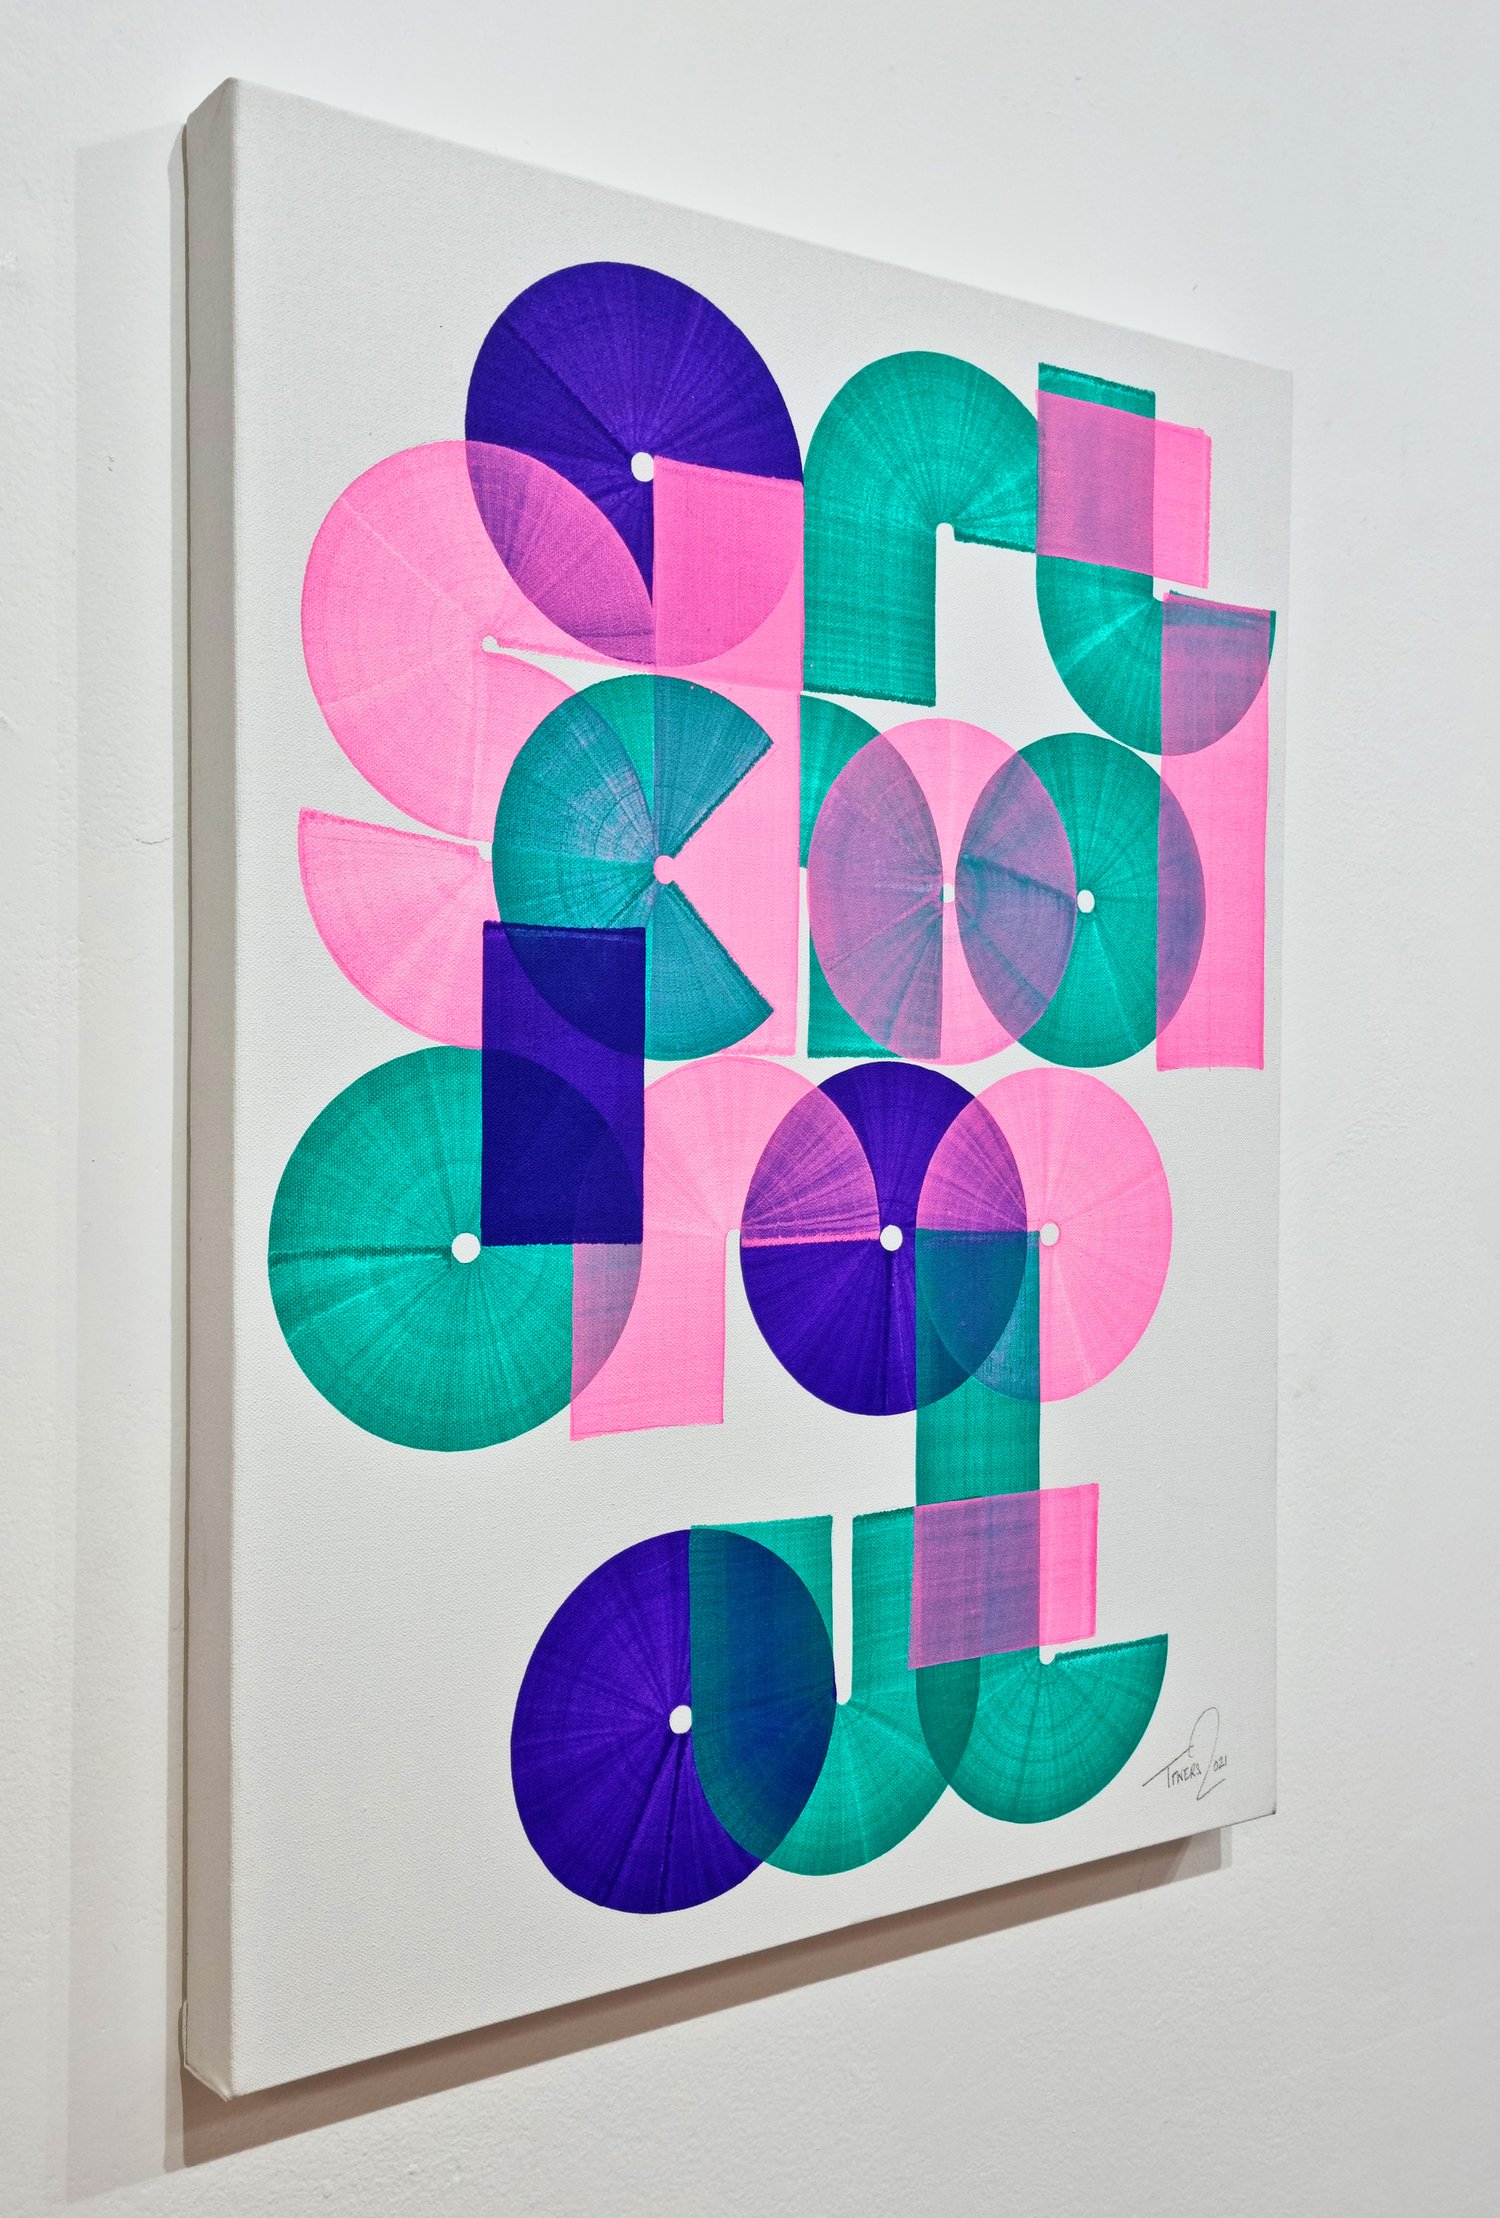 Image of ART SCHOOL DROPOUT (Pink) by Dave Towers